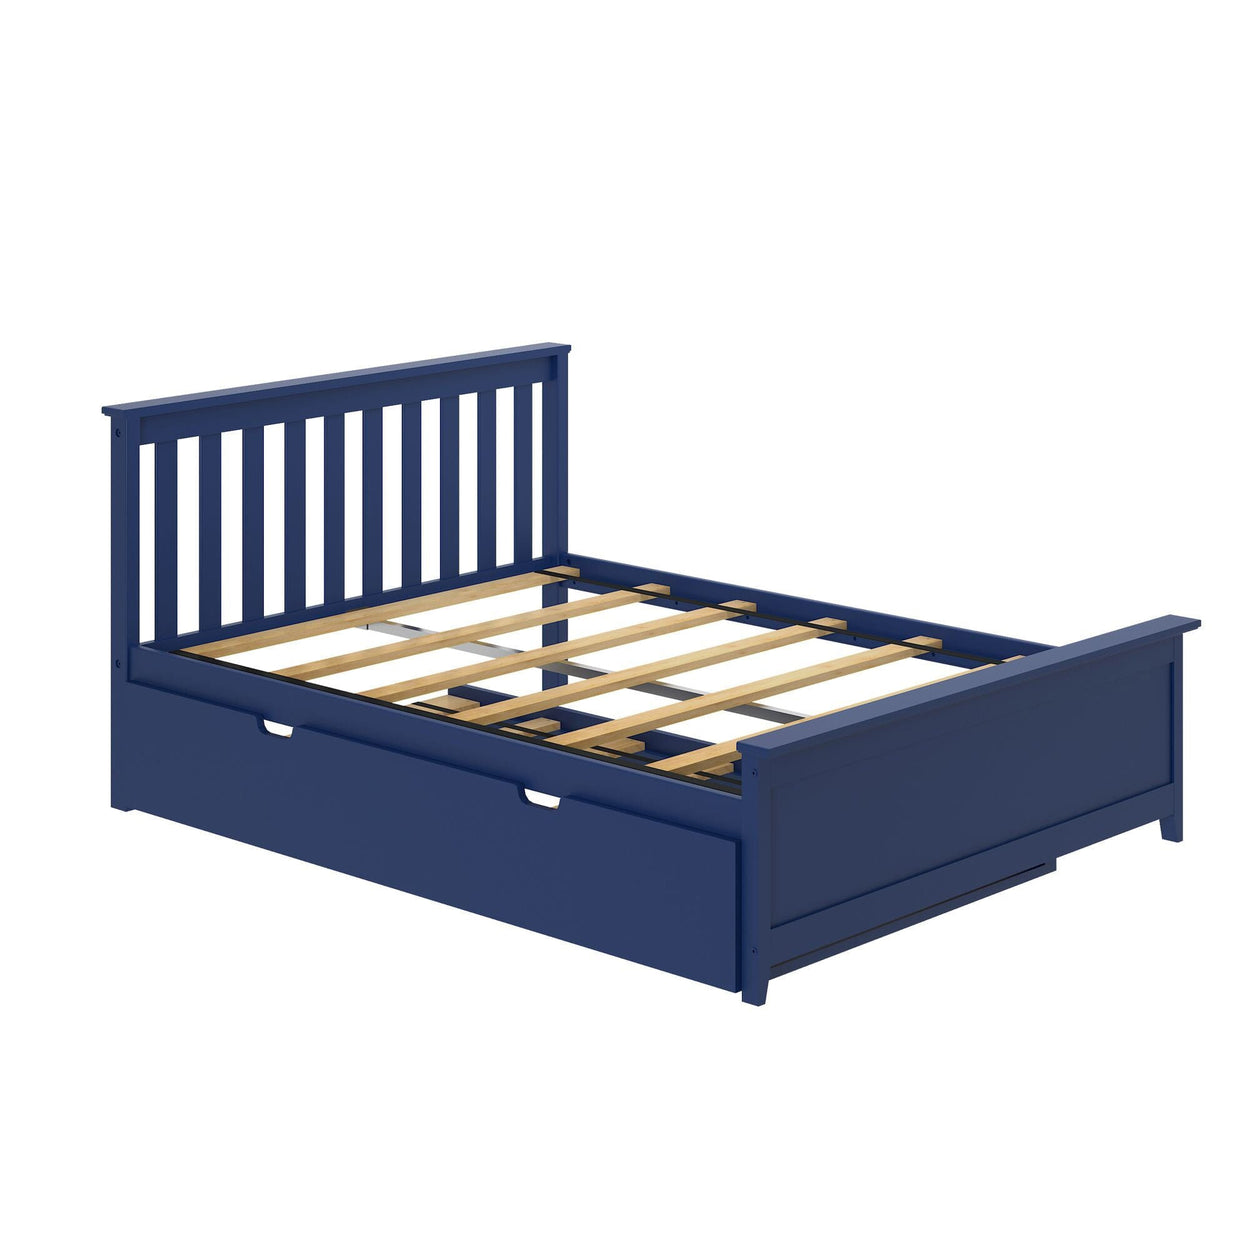 186211-131 : Kids Beds Classic Full-Size Bed with Trundle, Blue